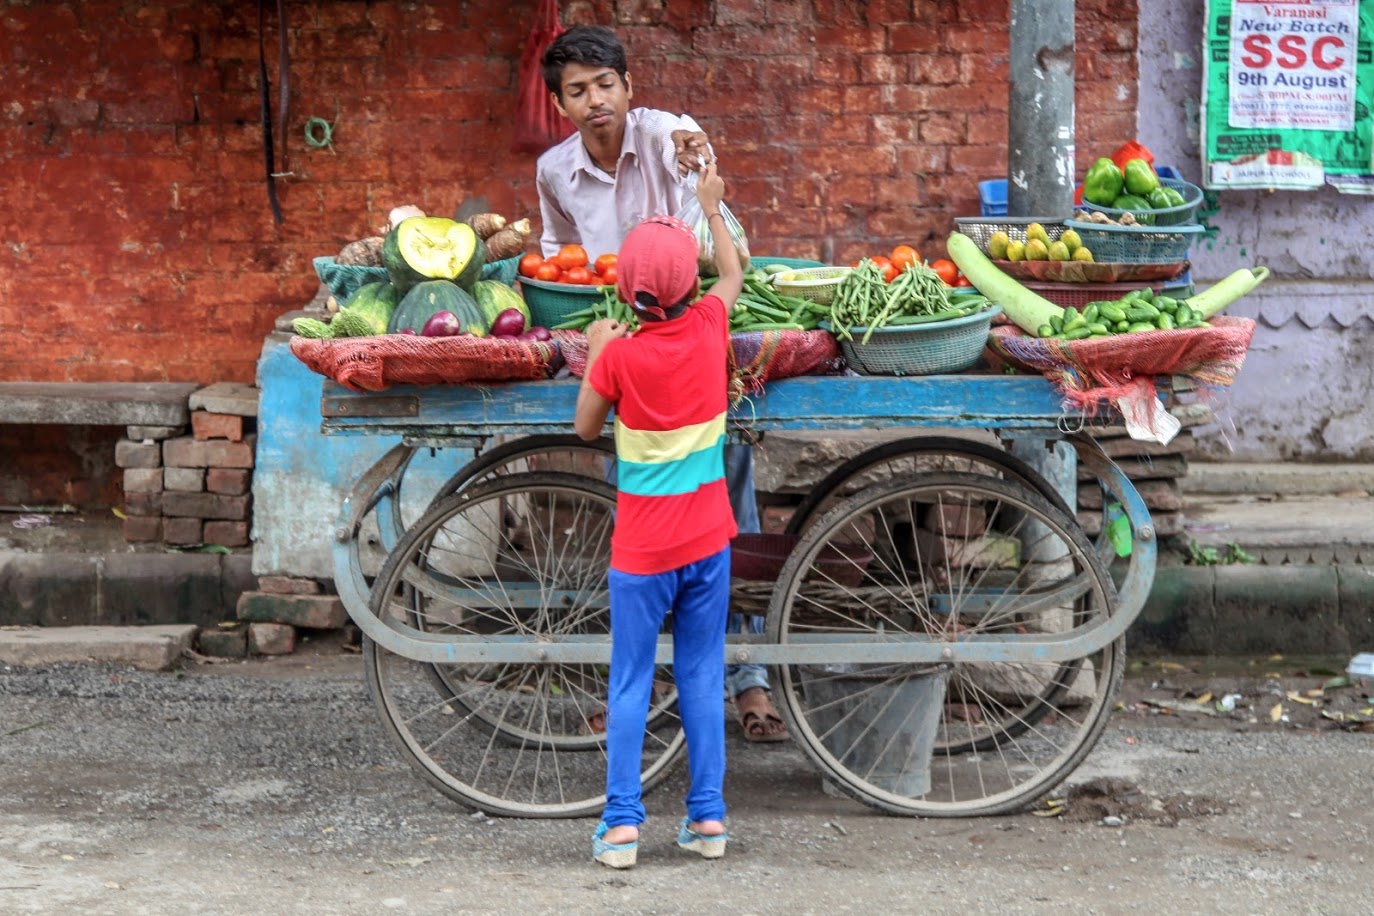 A child buys fruits and vegetables from a street cart in Varanasi, India. (Photo: Gert-Jan Stads/International Food Policy Research Institute)